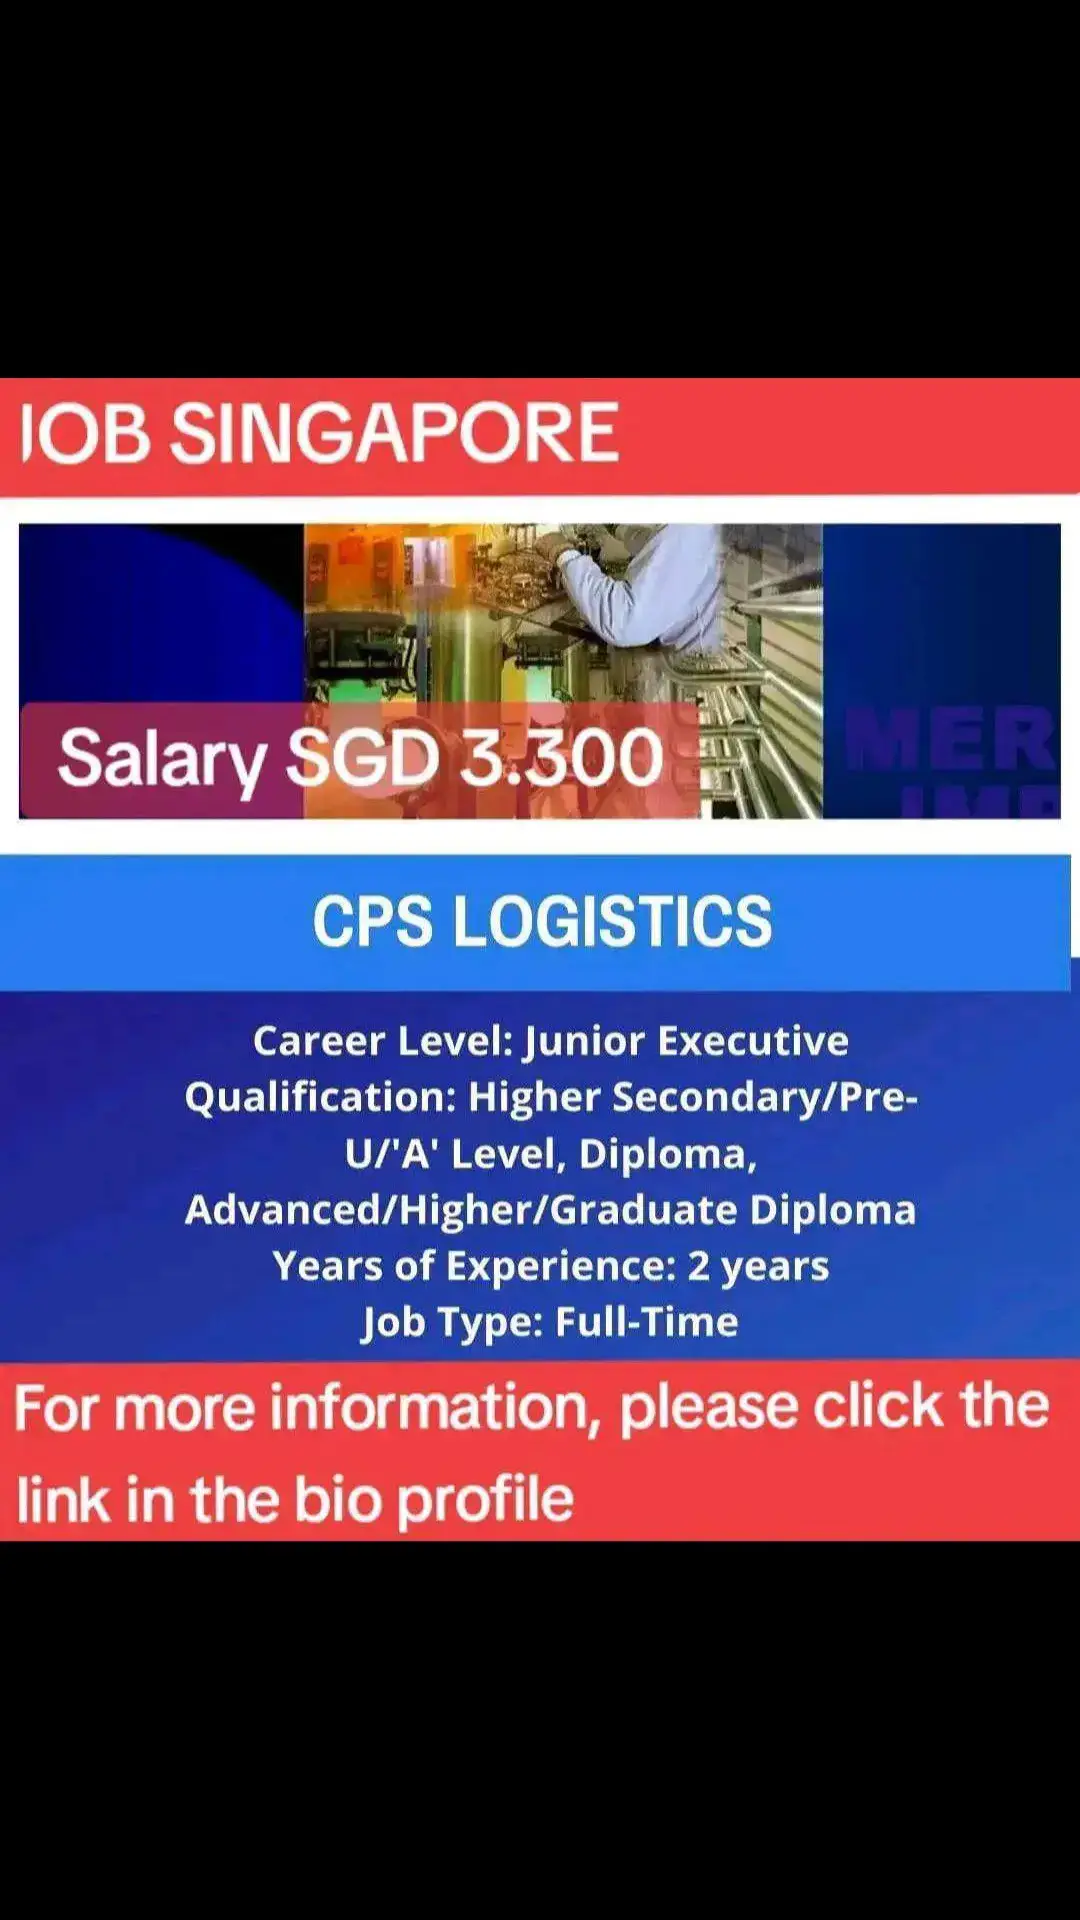 for information on job vacancies in Singapore, please click the link in my profile Bio  #jobsingapore #fypシ #sigaporetiktok #singapore #fyppp #singapore #jobsigapore #singaporejob #singaporeviral 